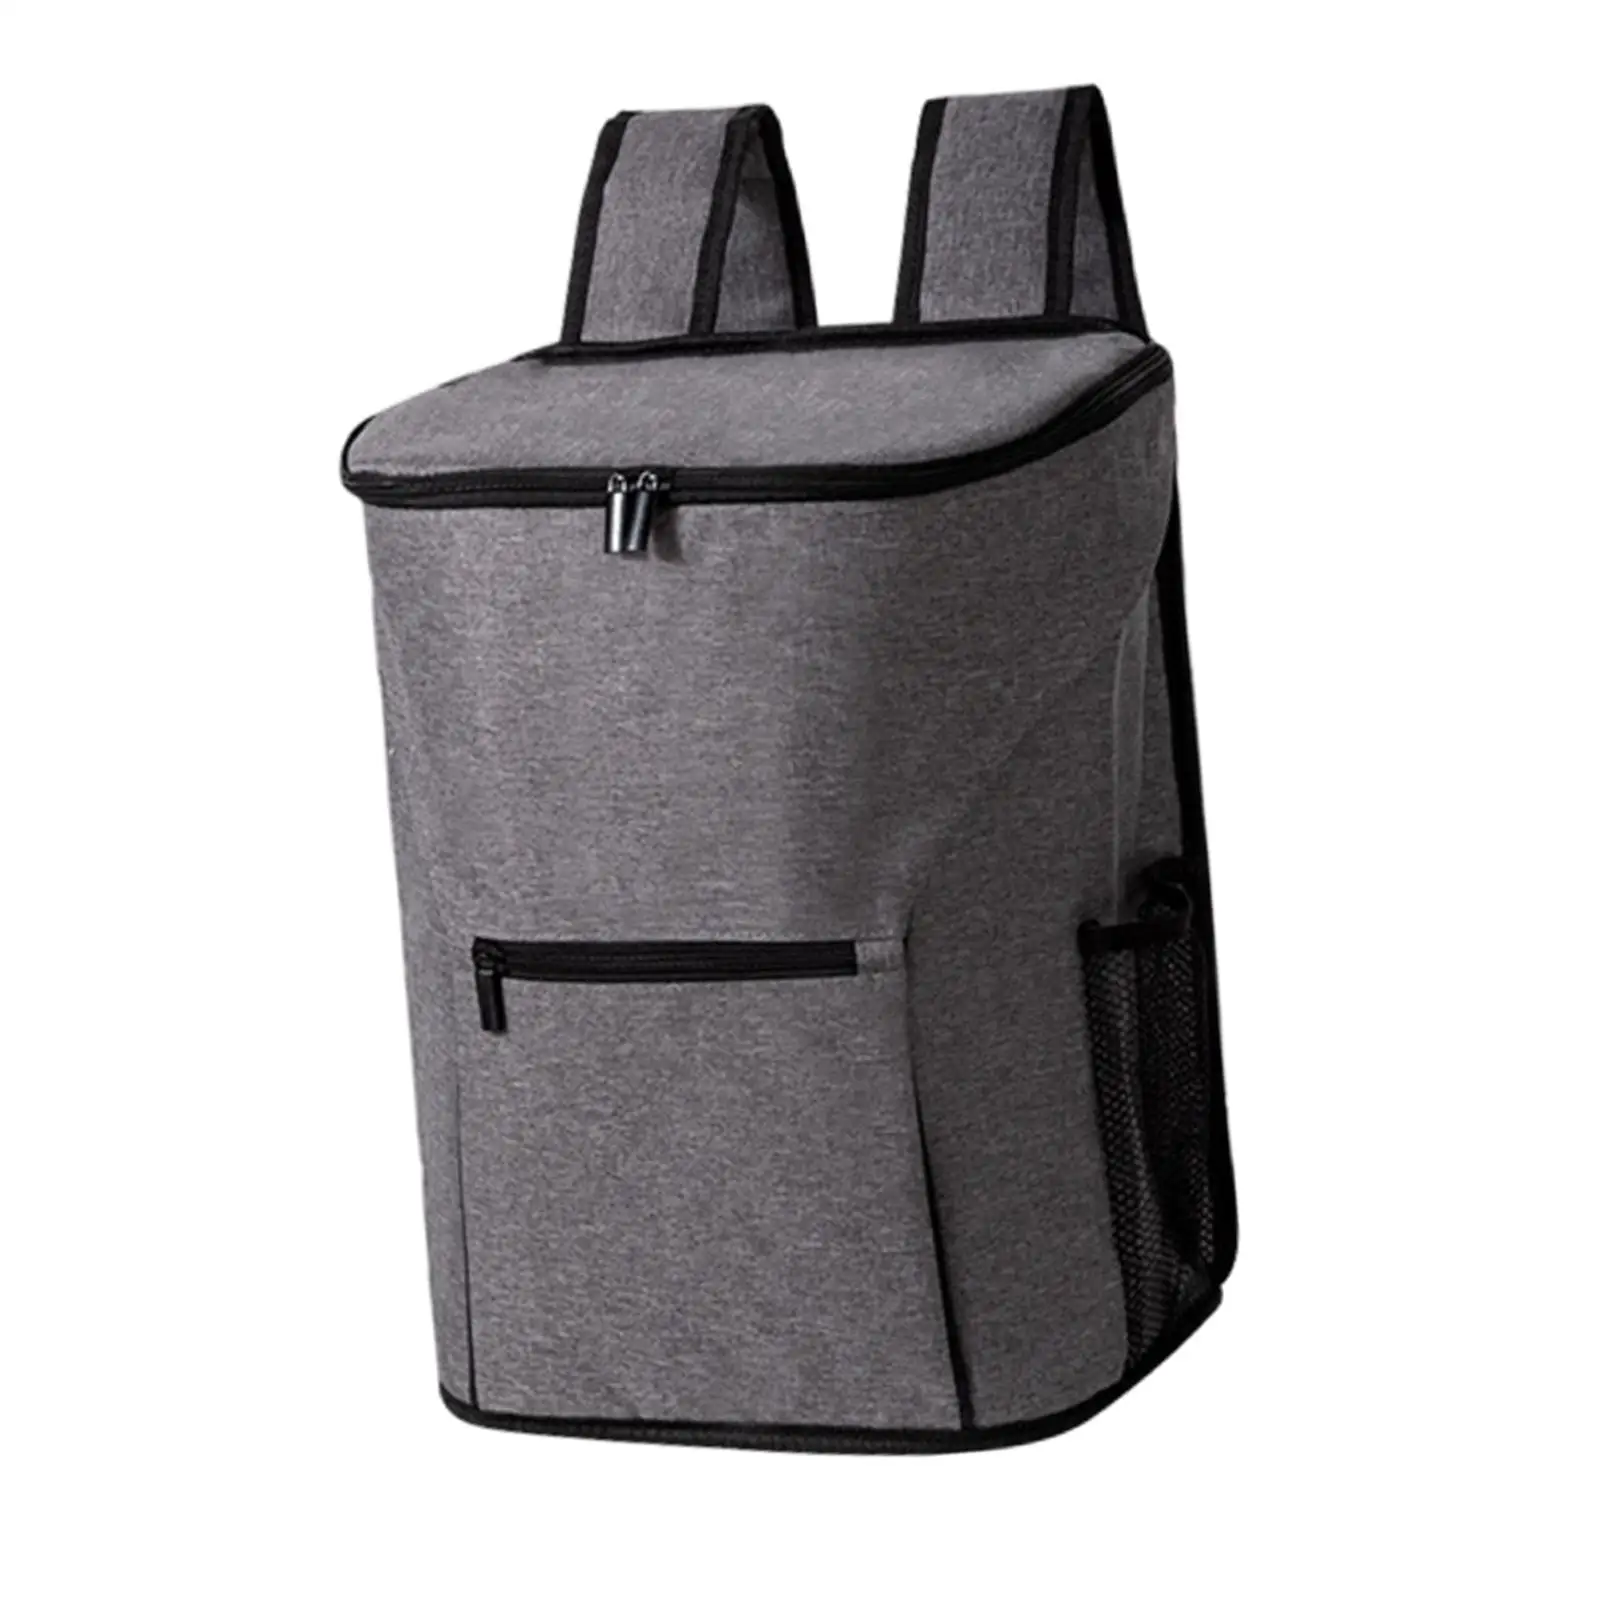 Cooler Bag Portable Leakproof Thermal Backpack Lunch Backpack Waterproof Beach Cooler for Travel Camping Work Picnic Hiking